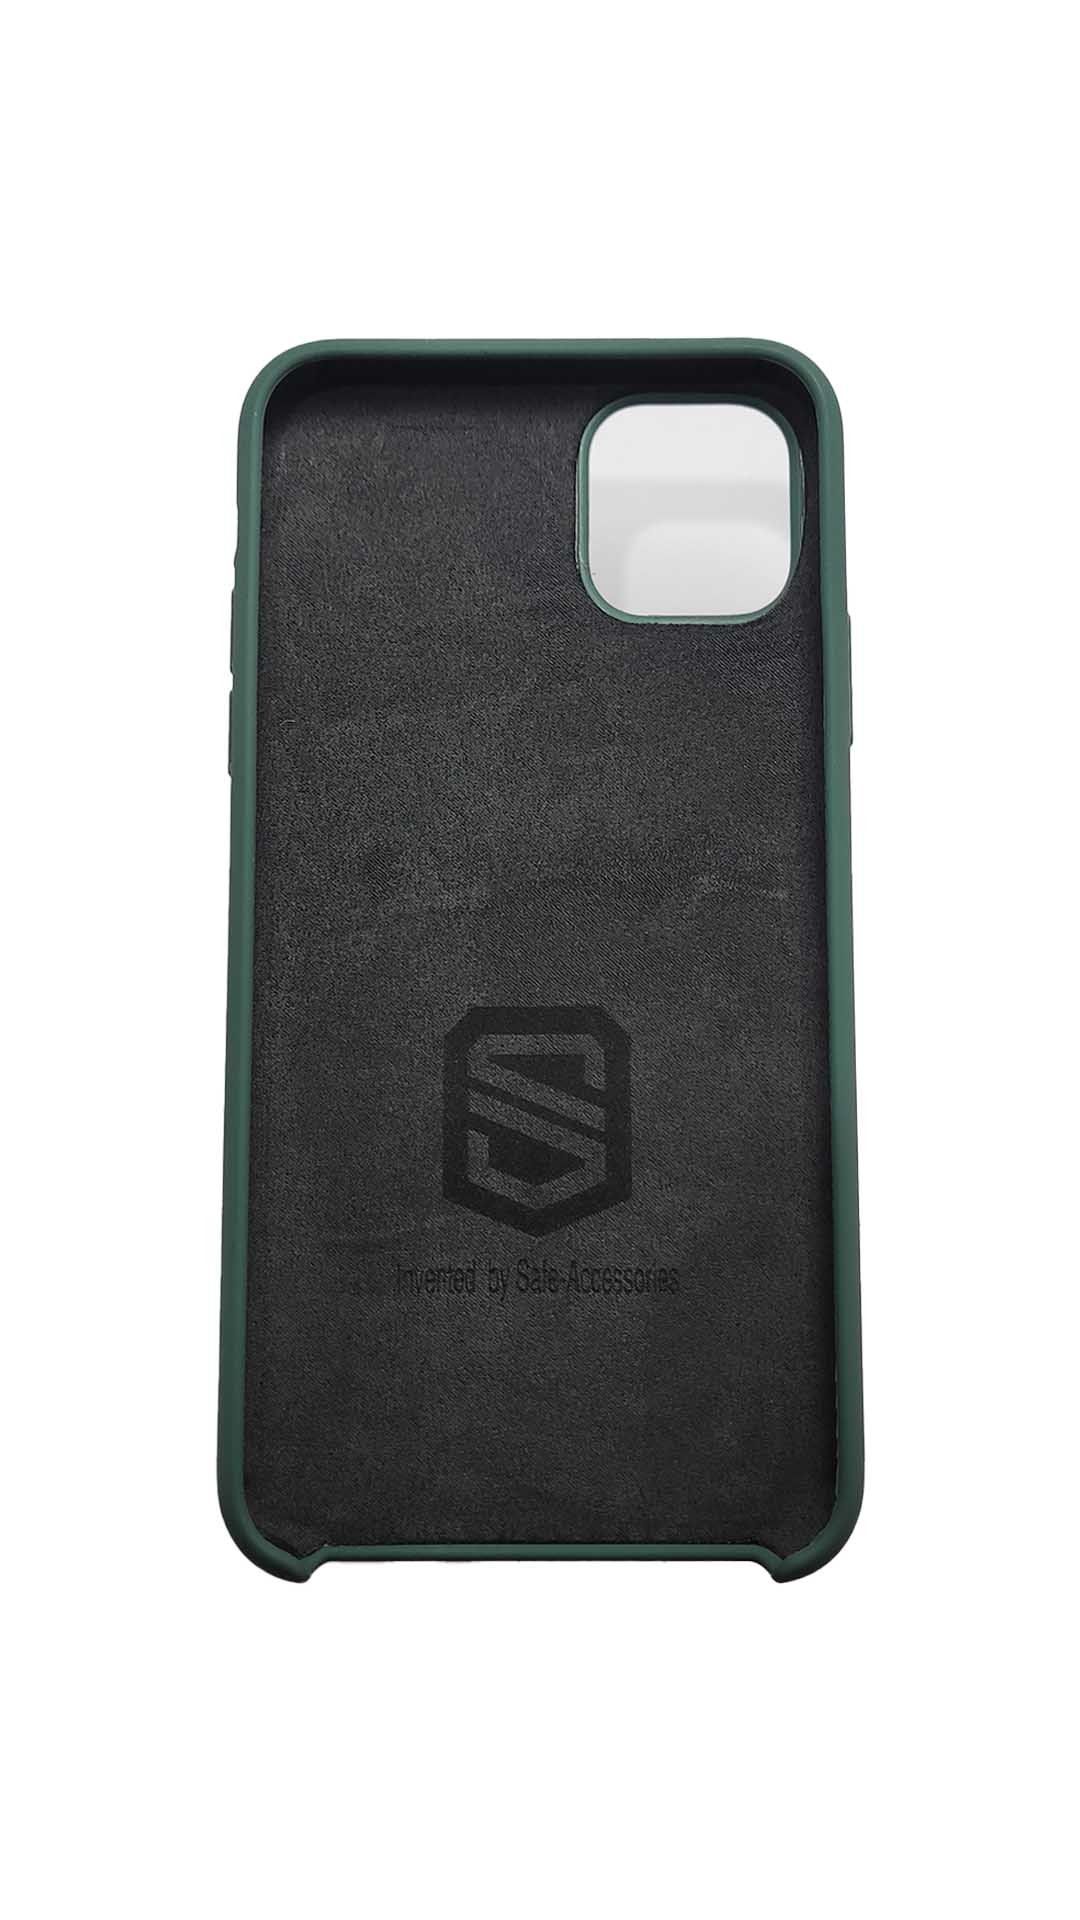 Inside view of Green Safe-Case for iPhone 11 Pro Max with Anti-radiation EMF protection